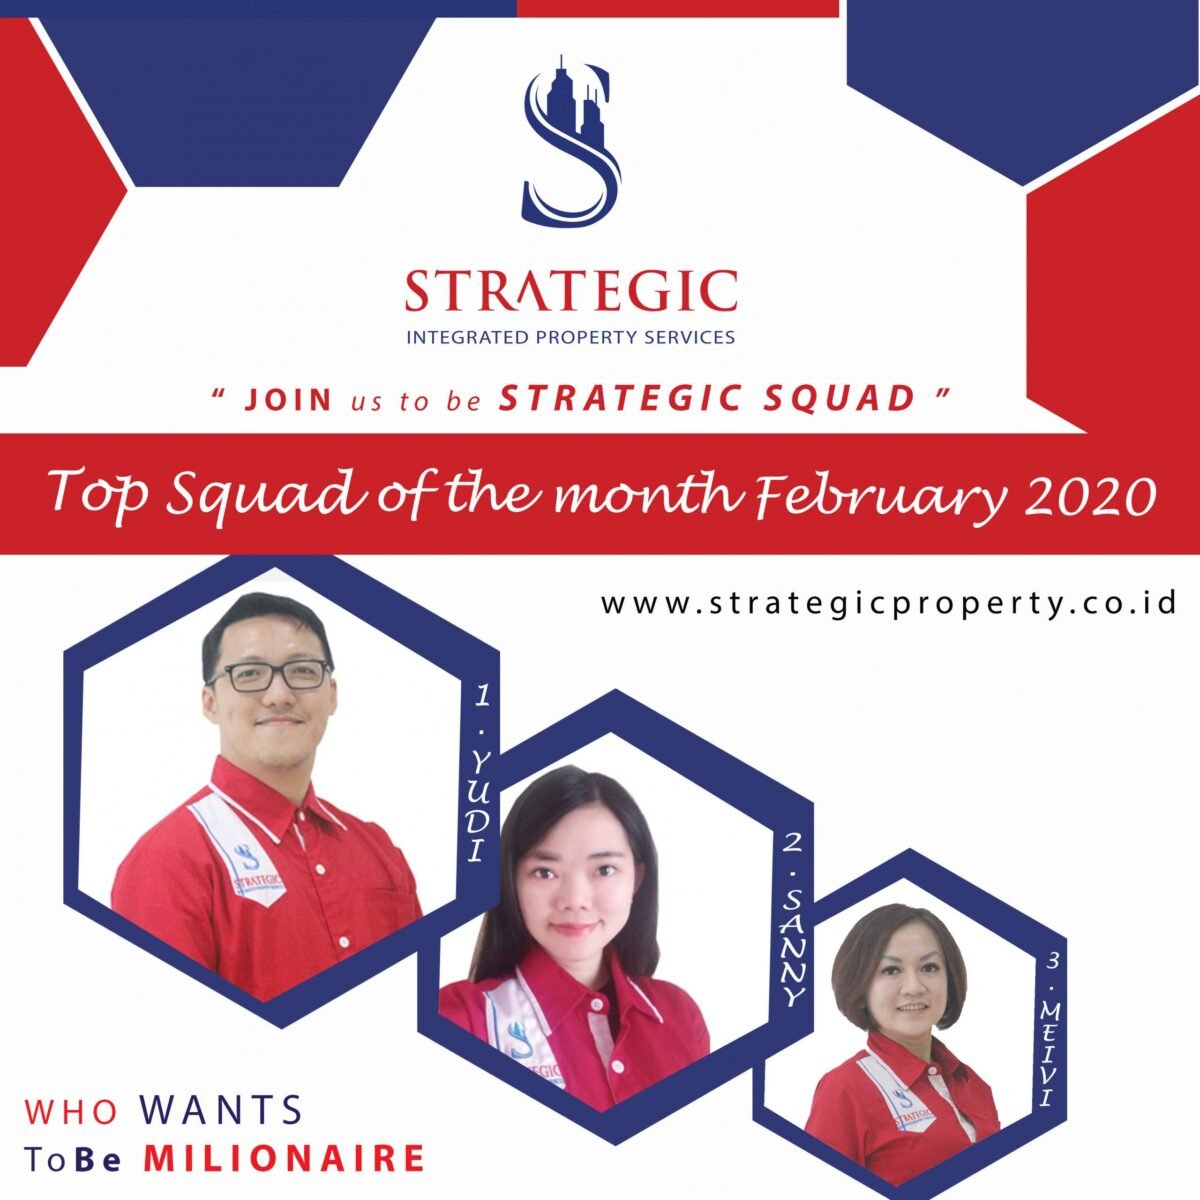 STRATEGIC PROPERTY TOP SQUAD OF THE MONTH FEBRUARY 2020